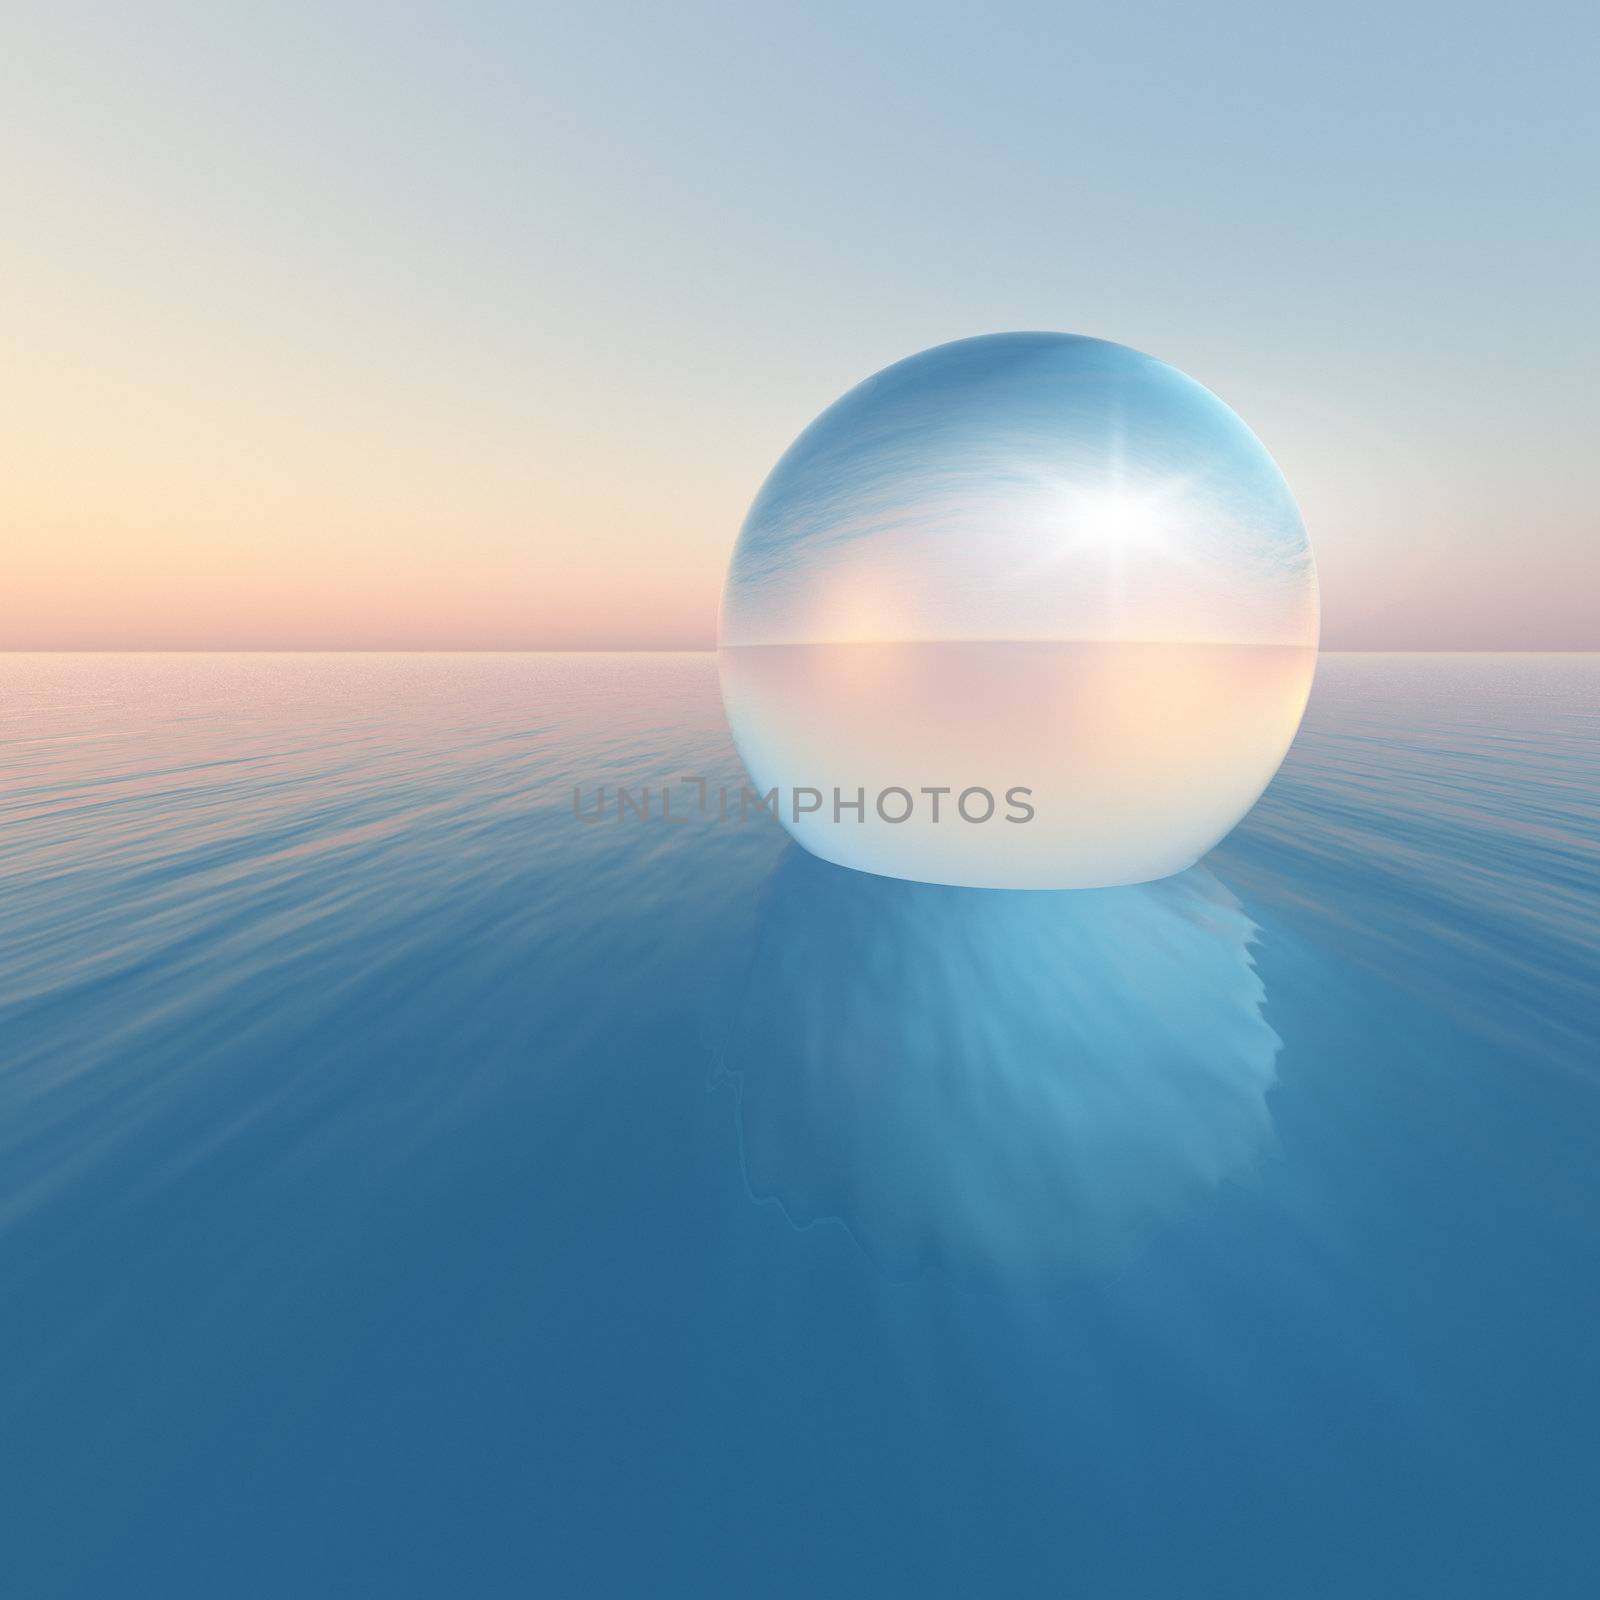 A surreal crystal sphere floating over the ocean horizon on clear morning sky.